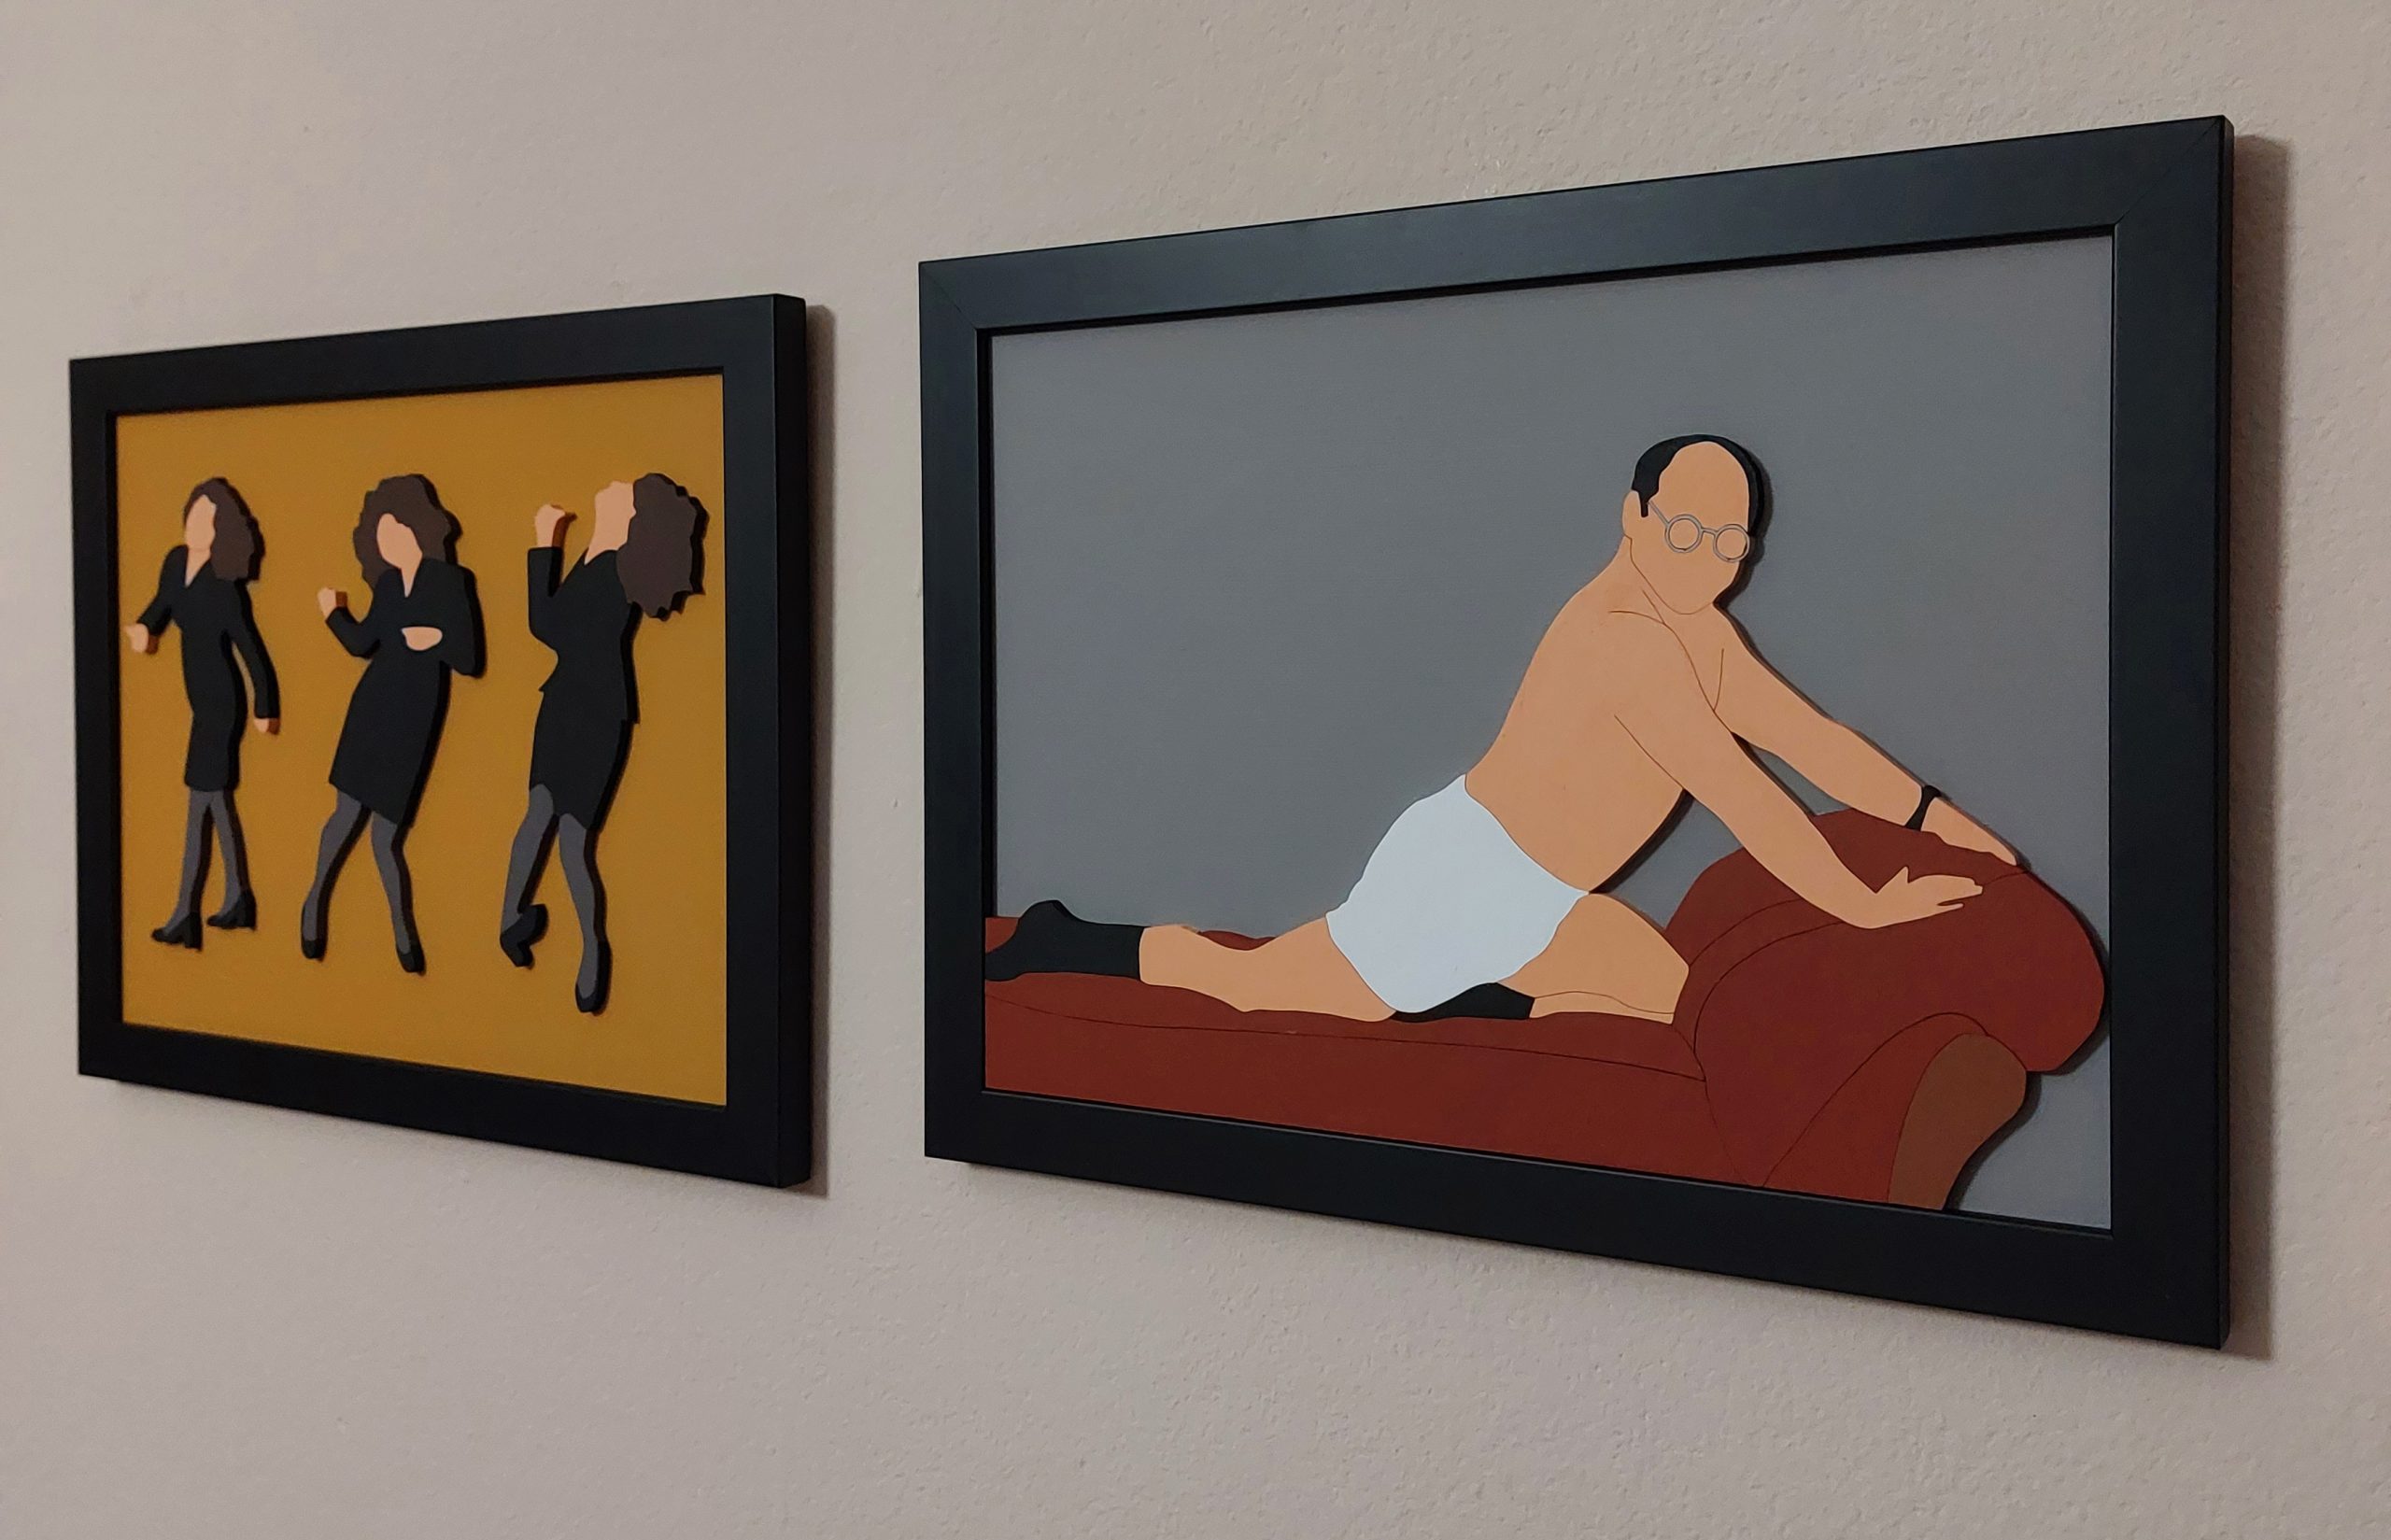 I made Seinfeld scenes as wooden wall items. I hope you indulge in these.